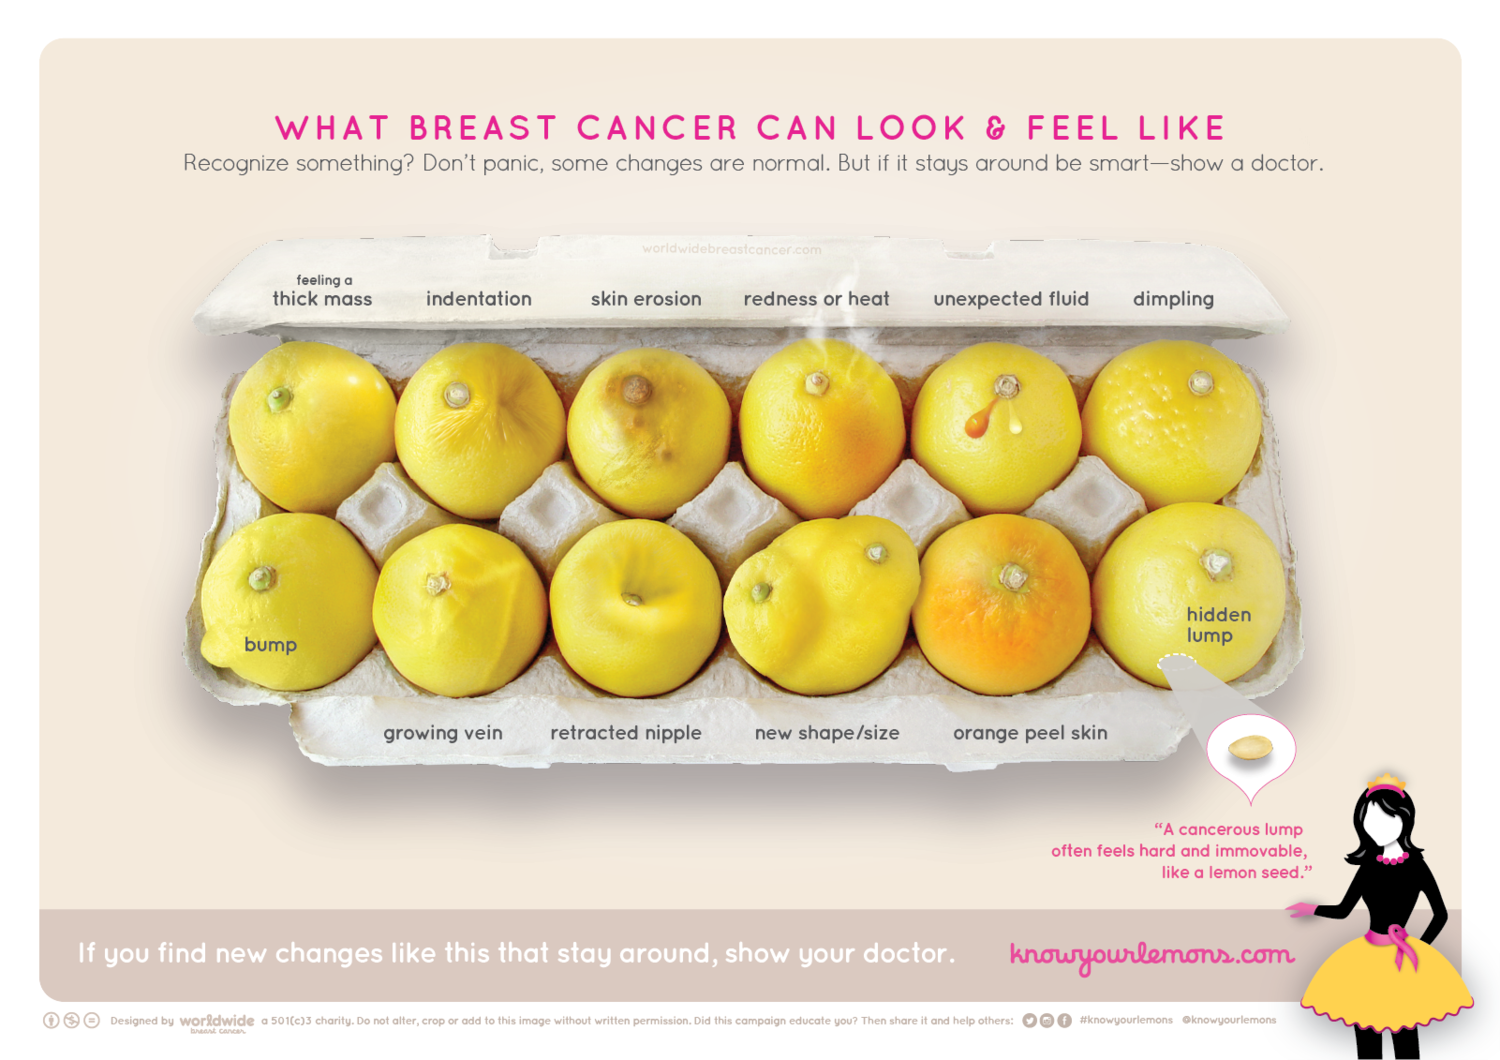 A Carton of Lemons Offers a Simple Lesson About Breast Cancer